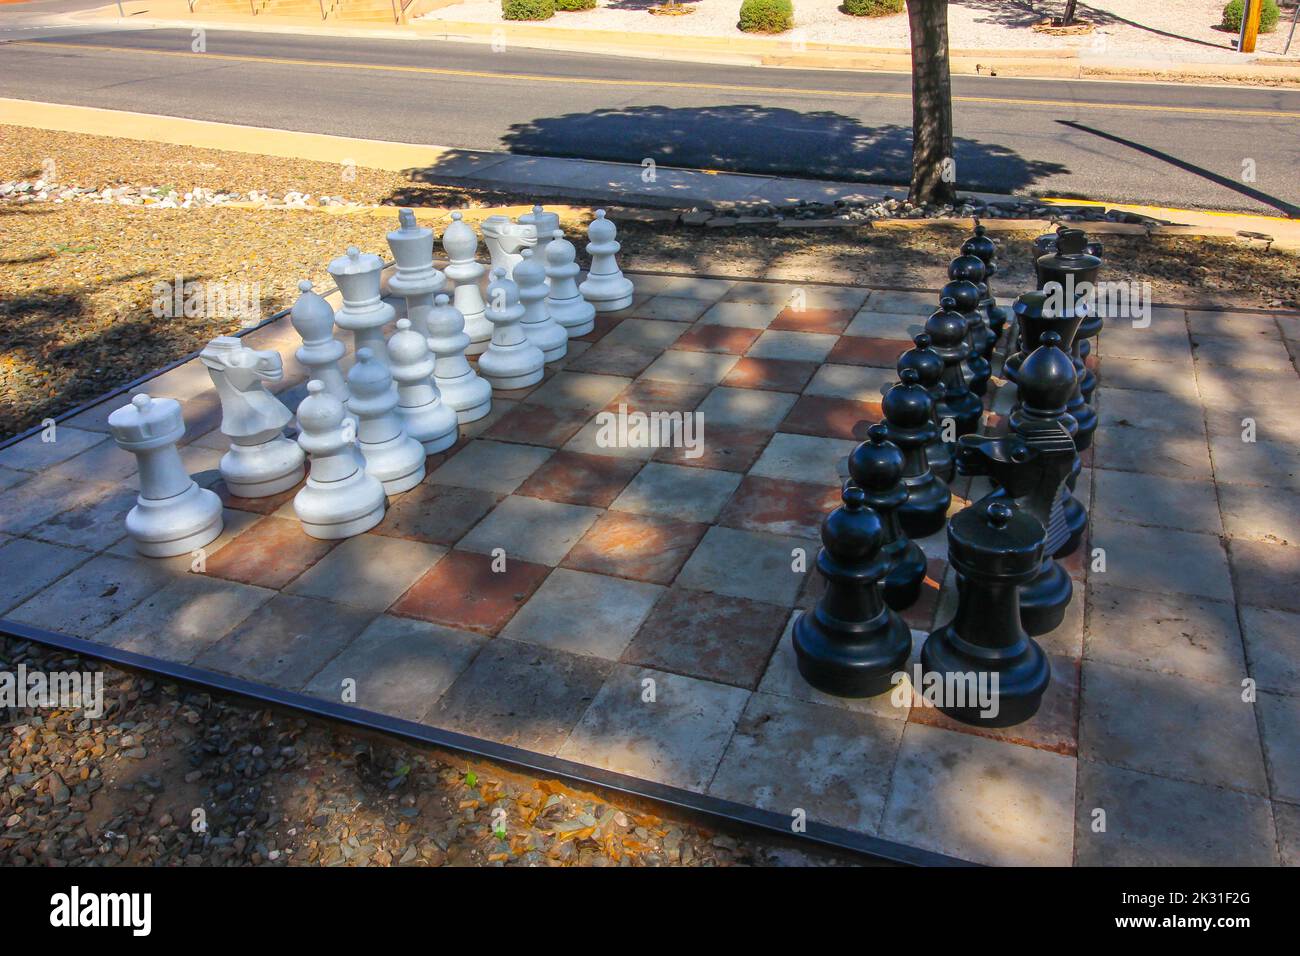 Large Lawn Chess Pieces On Display Stock Photo